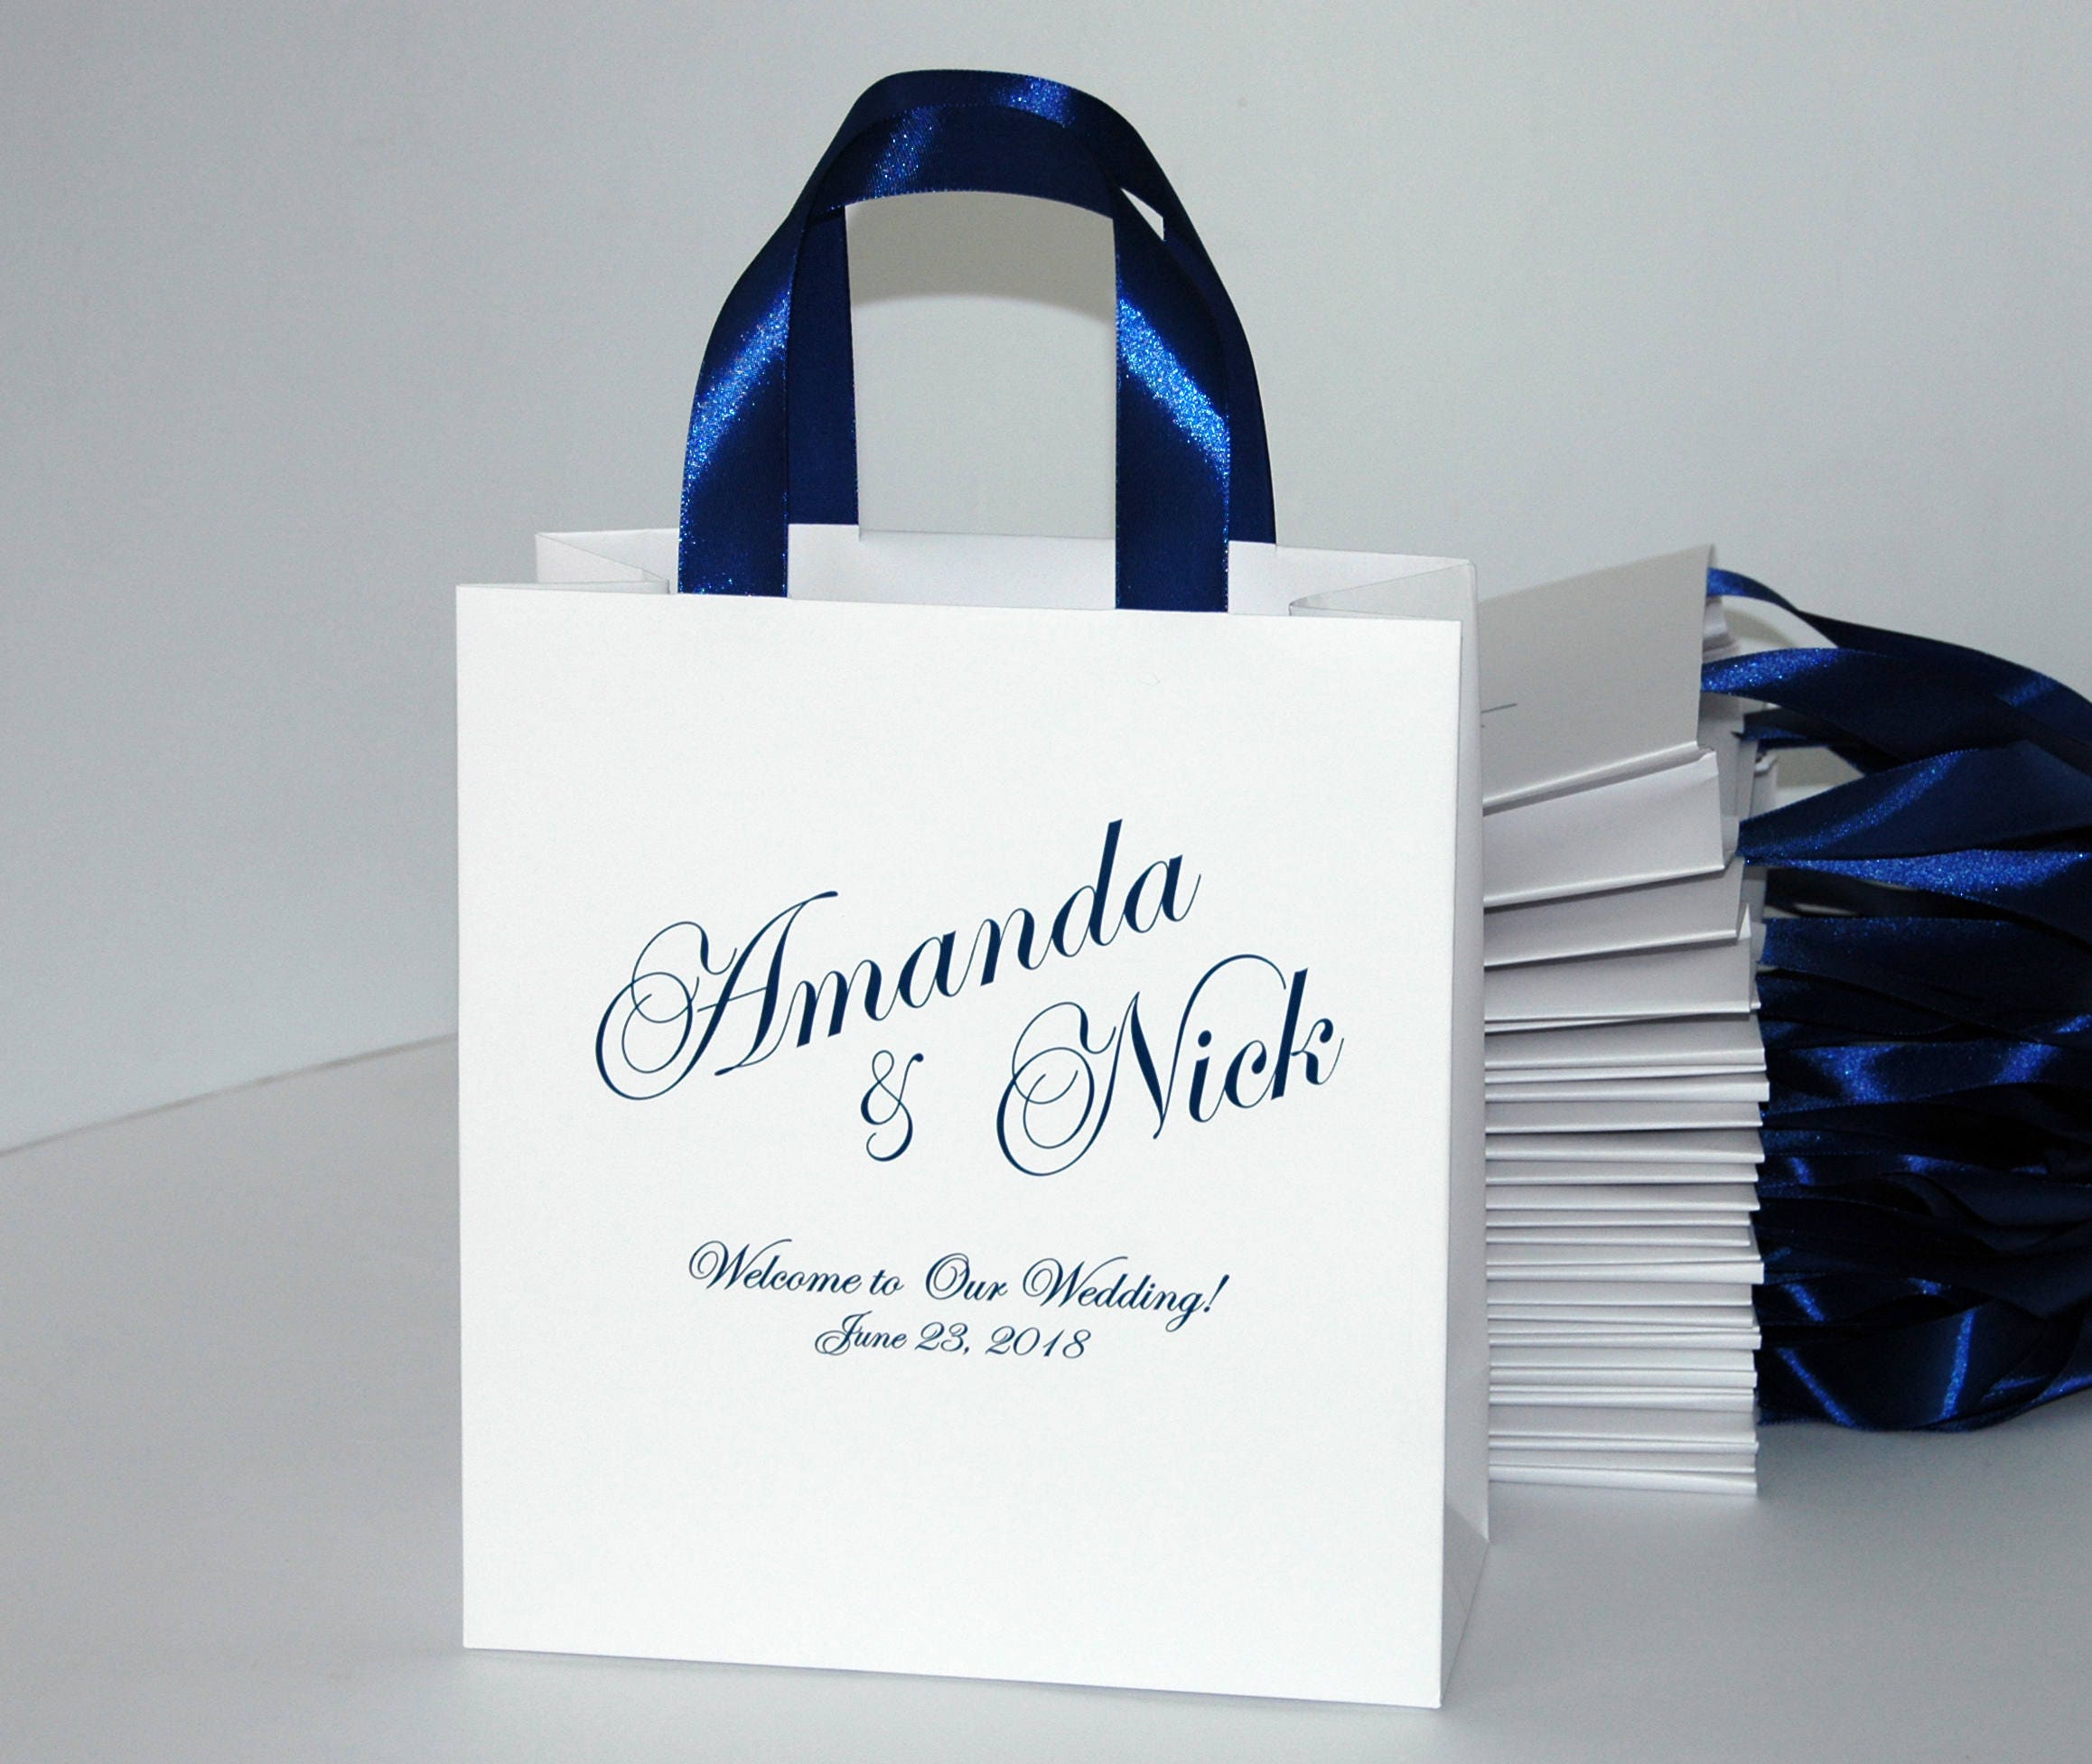 35 Navy Blue Wedding Welcome Bags with satin ribbon handles | Etsy